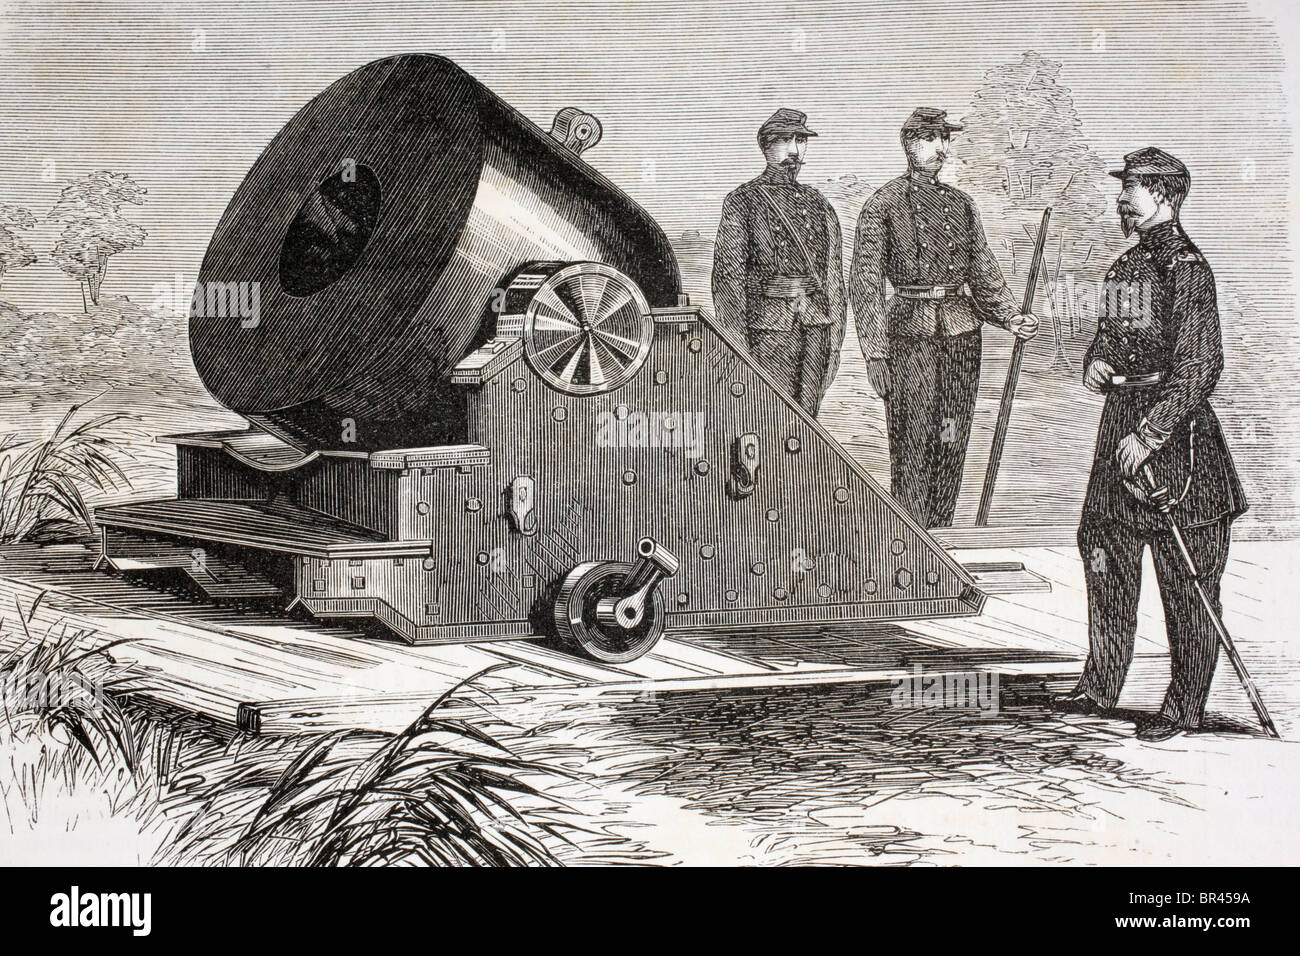 Mortar built circa 1862 in the United States, firing 13 inch diameter balls and weighing 17,000 pounds. Stock Photo